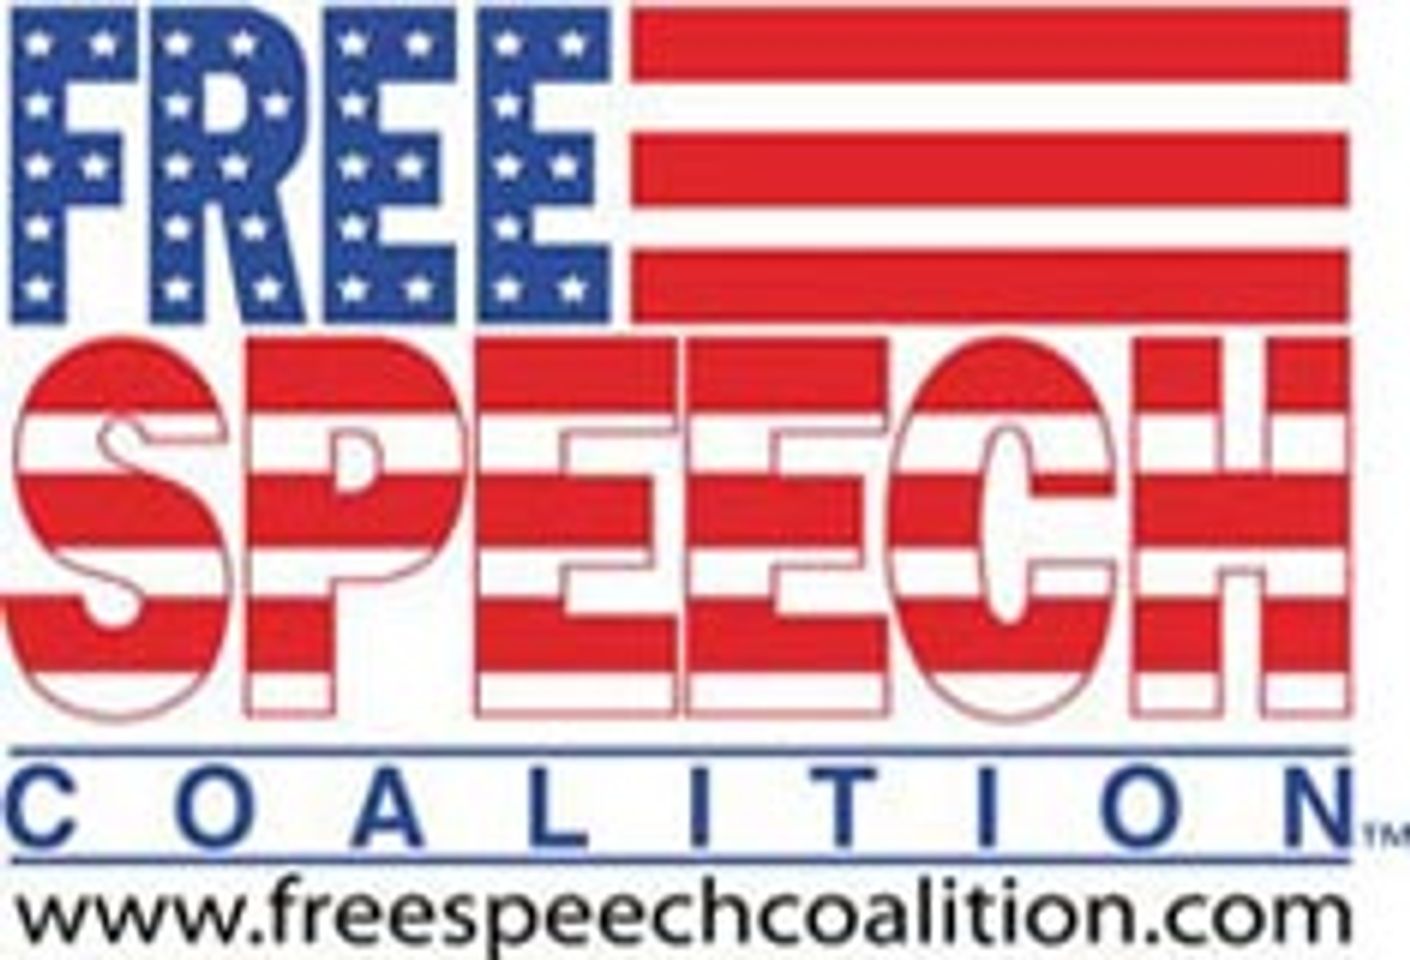 Free Speech Coalition to File Lawsuit Challenging New 2257 Regulations